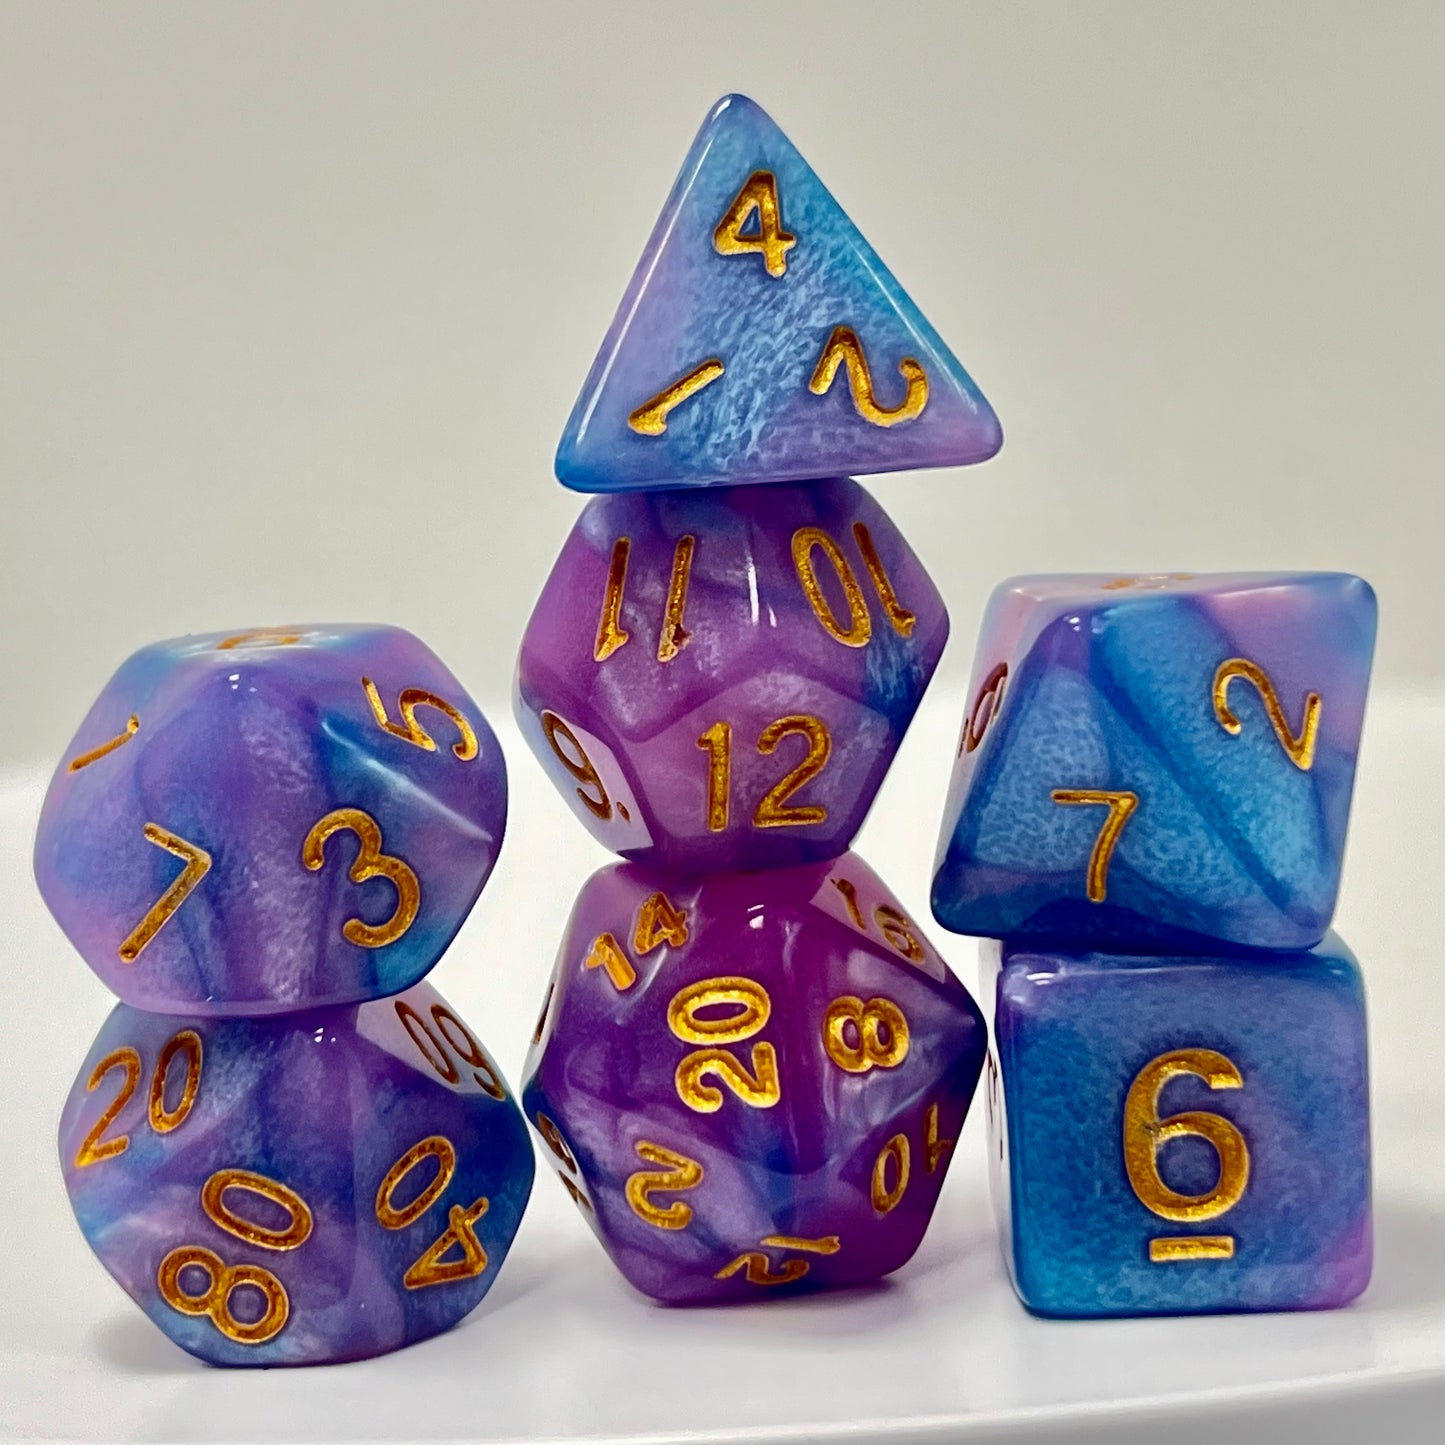  DND dice sets for TTRPG role playing games, dice goblin and dice dragon collectors